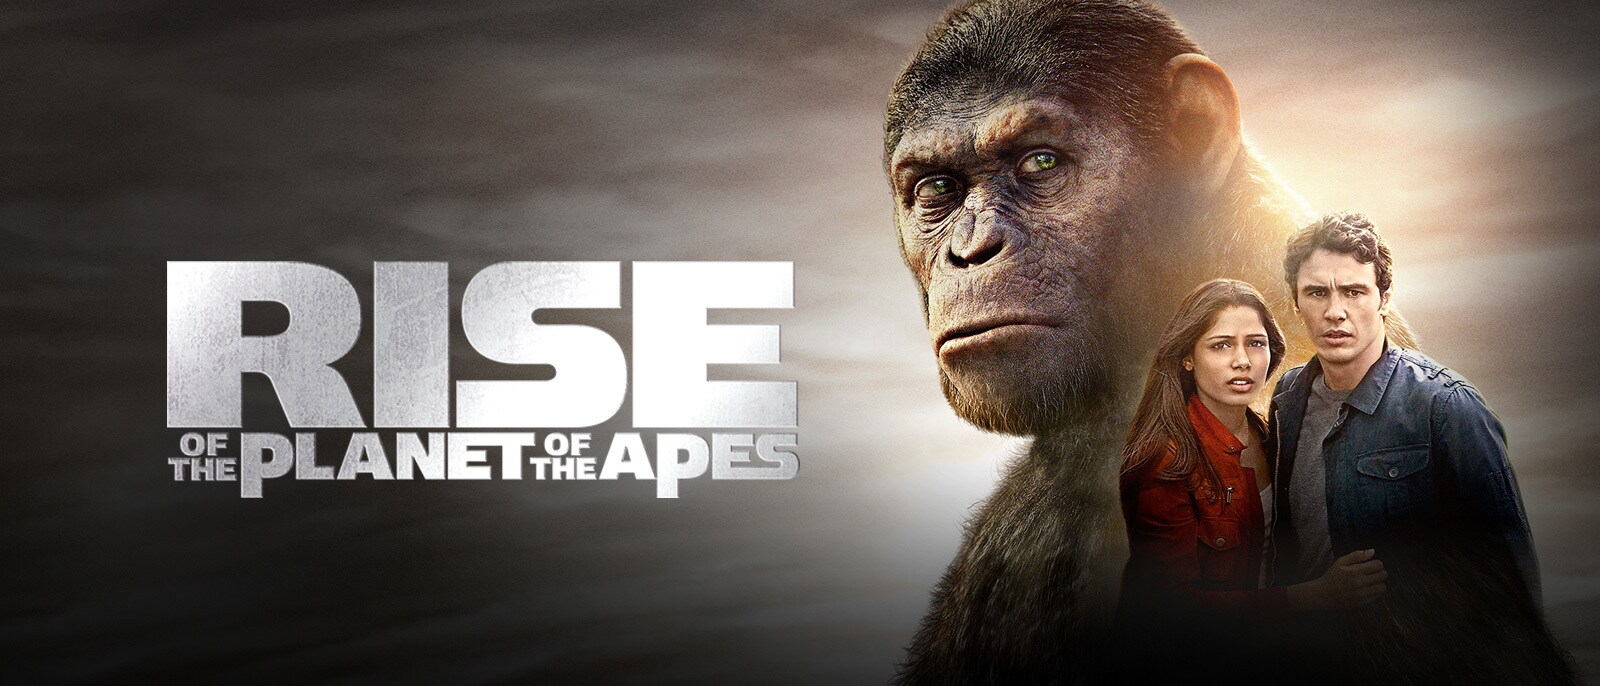 the planet of the apes full movie in tamil